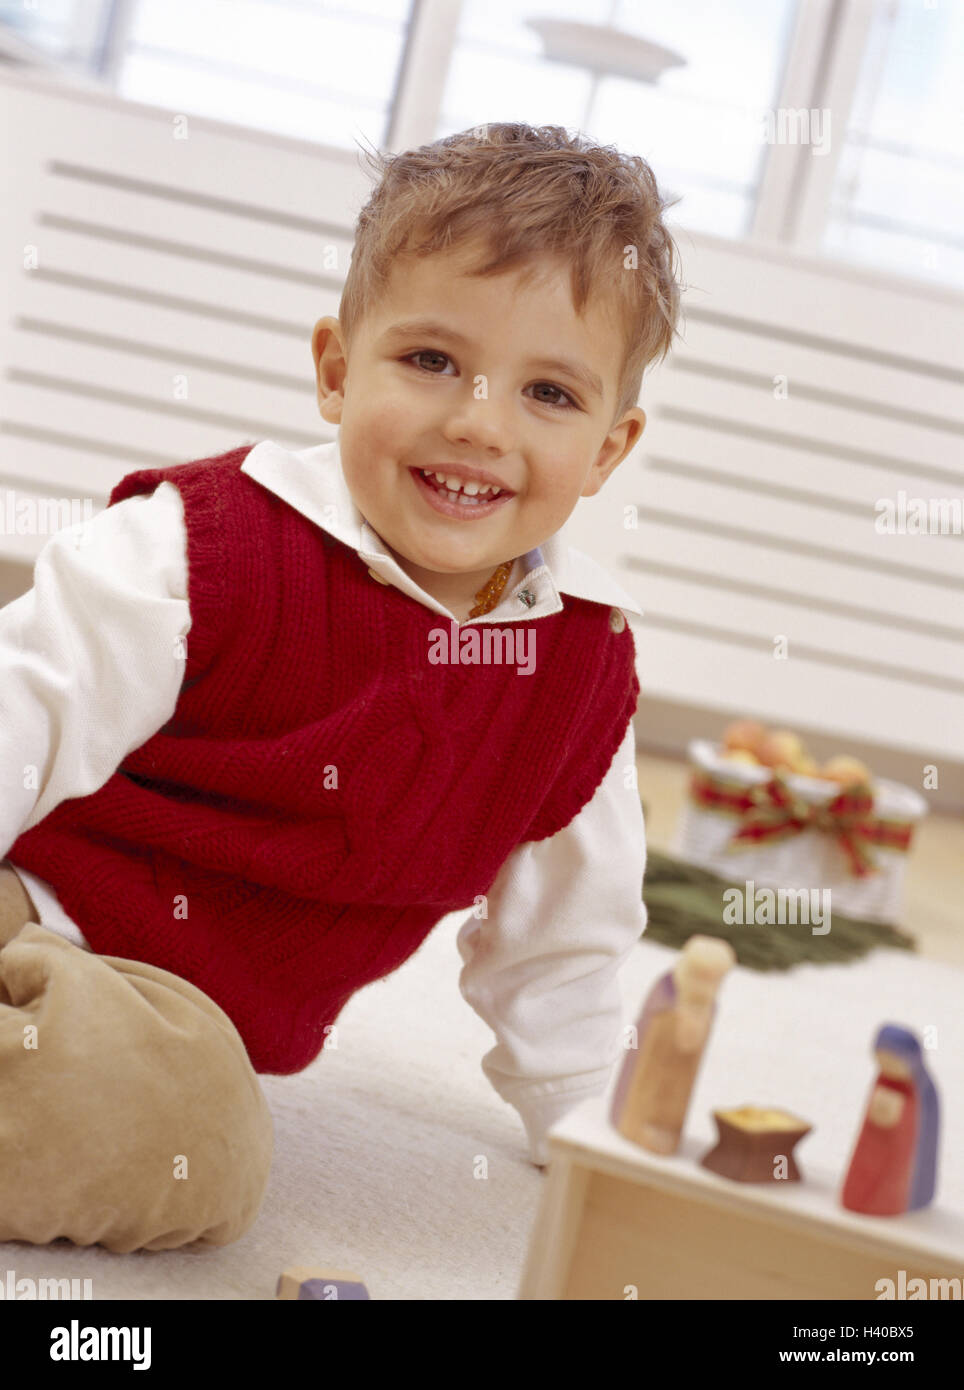 Christmas, floor, boy, nativity figurines, plays, yule tide, Advent season, Advent, child, infant, childhood, lighthearted, natural, happily, amusements, fun, characters, Wooden characters, game, activity, inside, for Christmas, prejoy Stock Photo